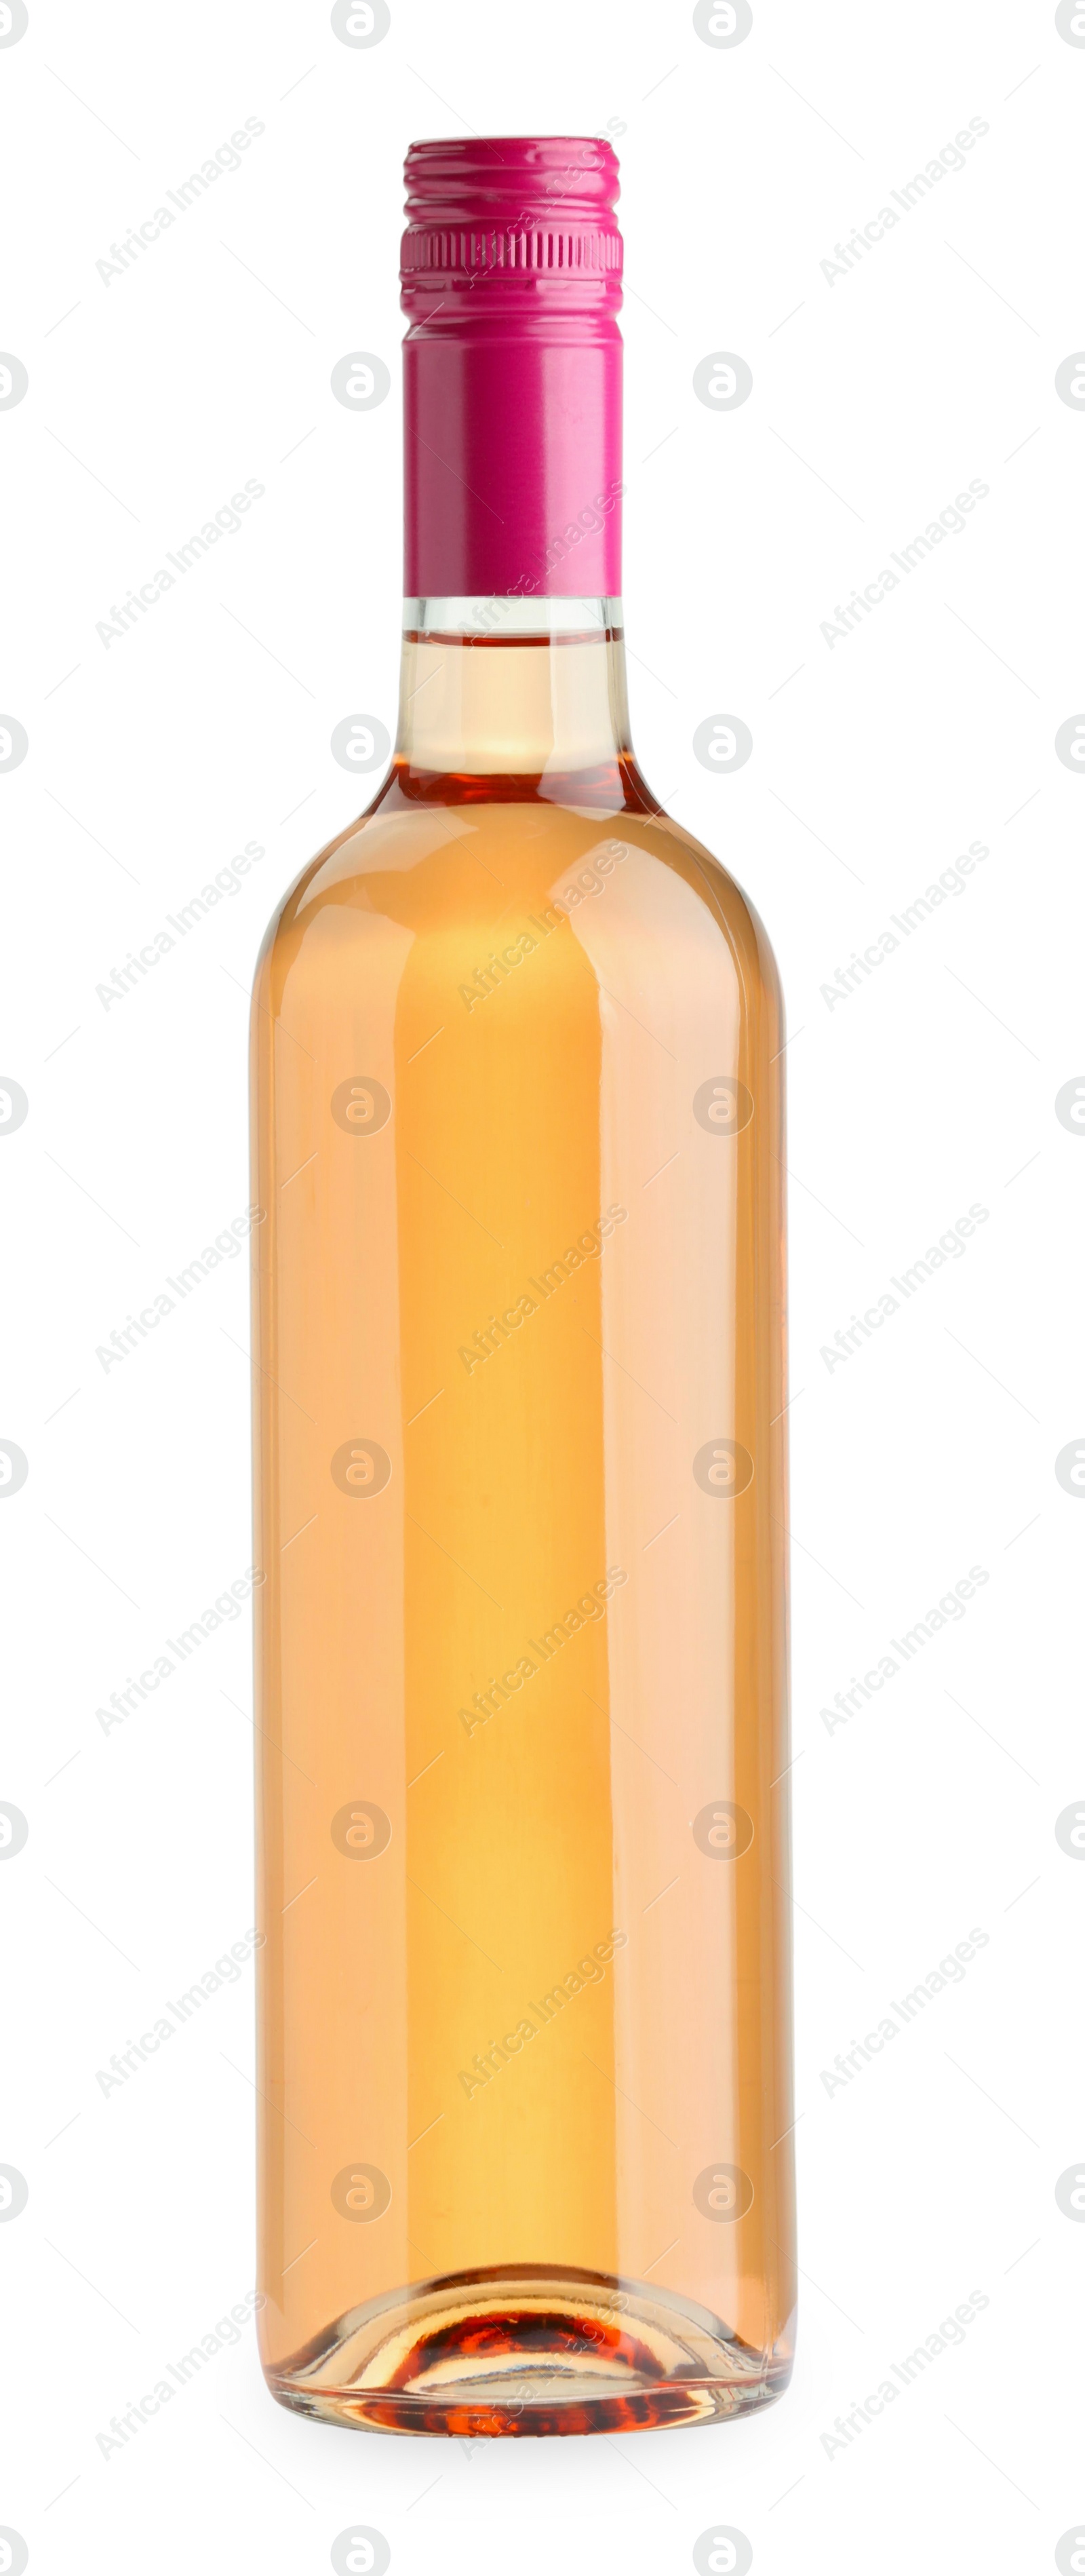 Photo of Bottle of expensive rose wine isolated on white